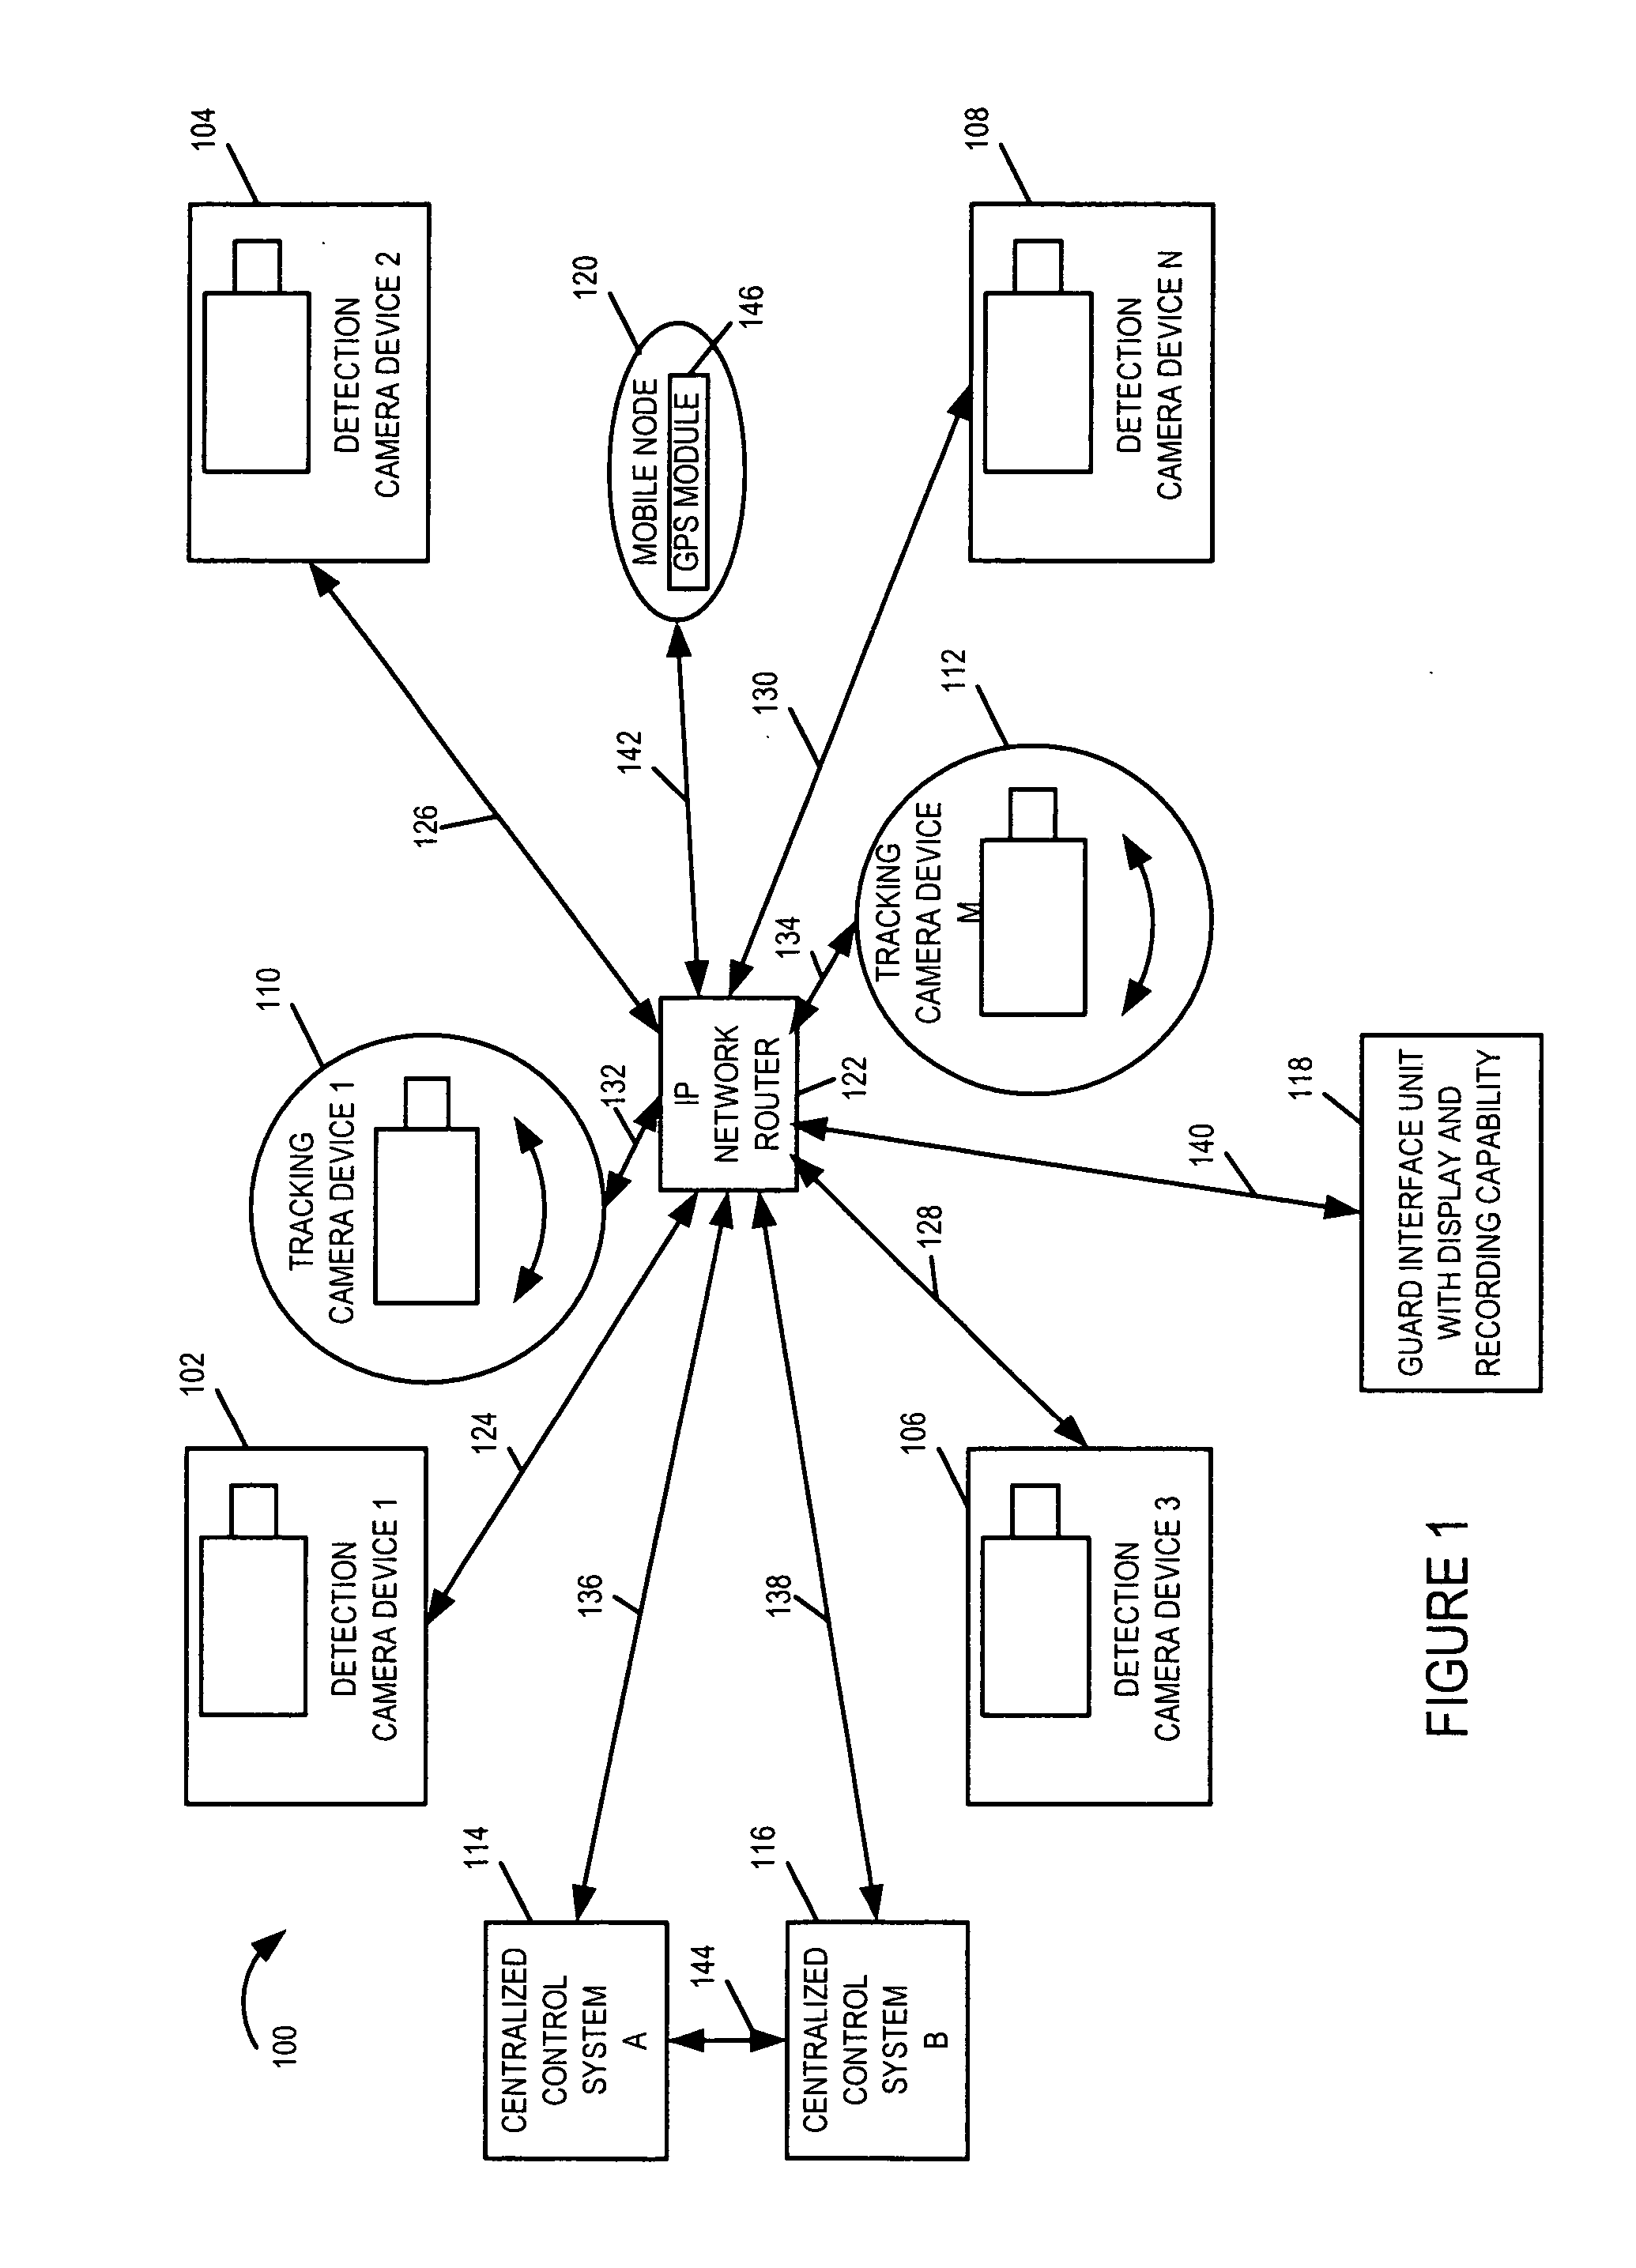 Methods and apparatus for providing fault tolerance in a surveillance system